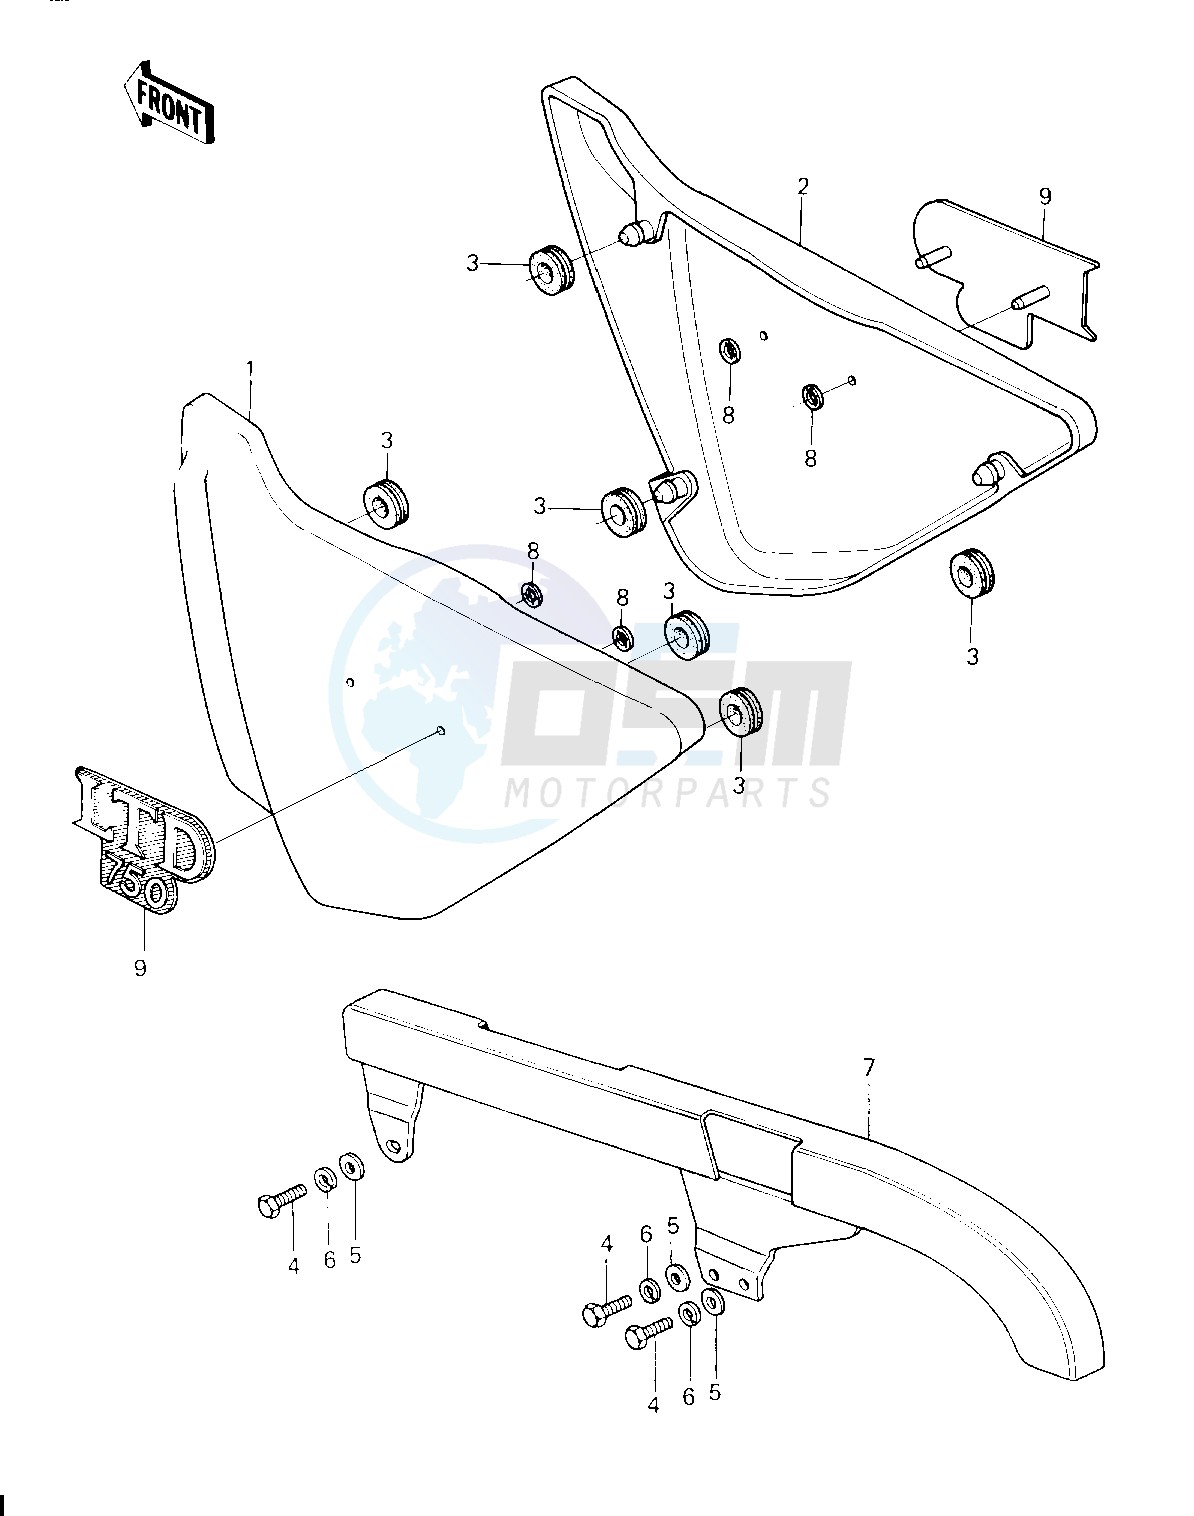 SIDE COVERS_CHAIN COVER -- 80 H1- - blueprint